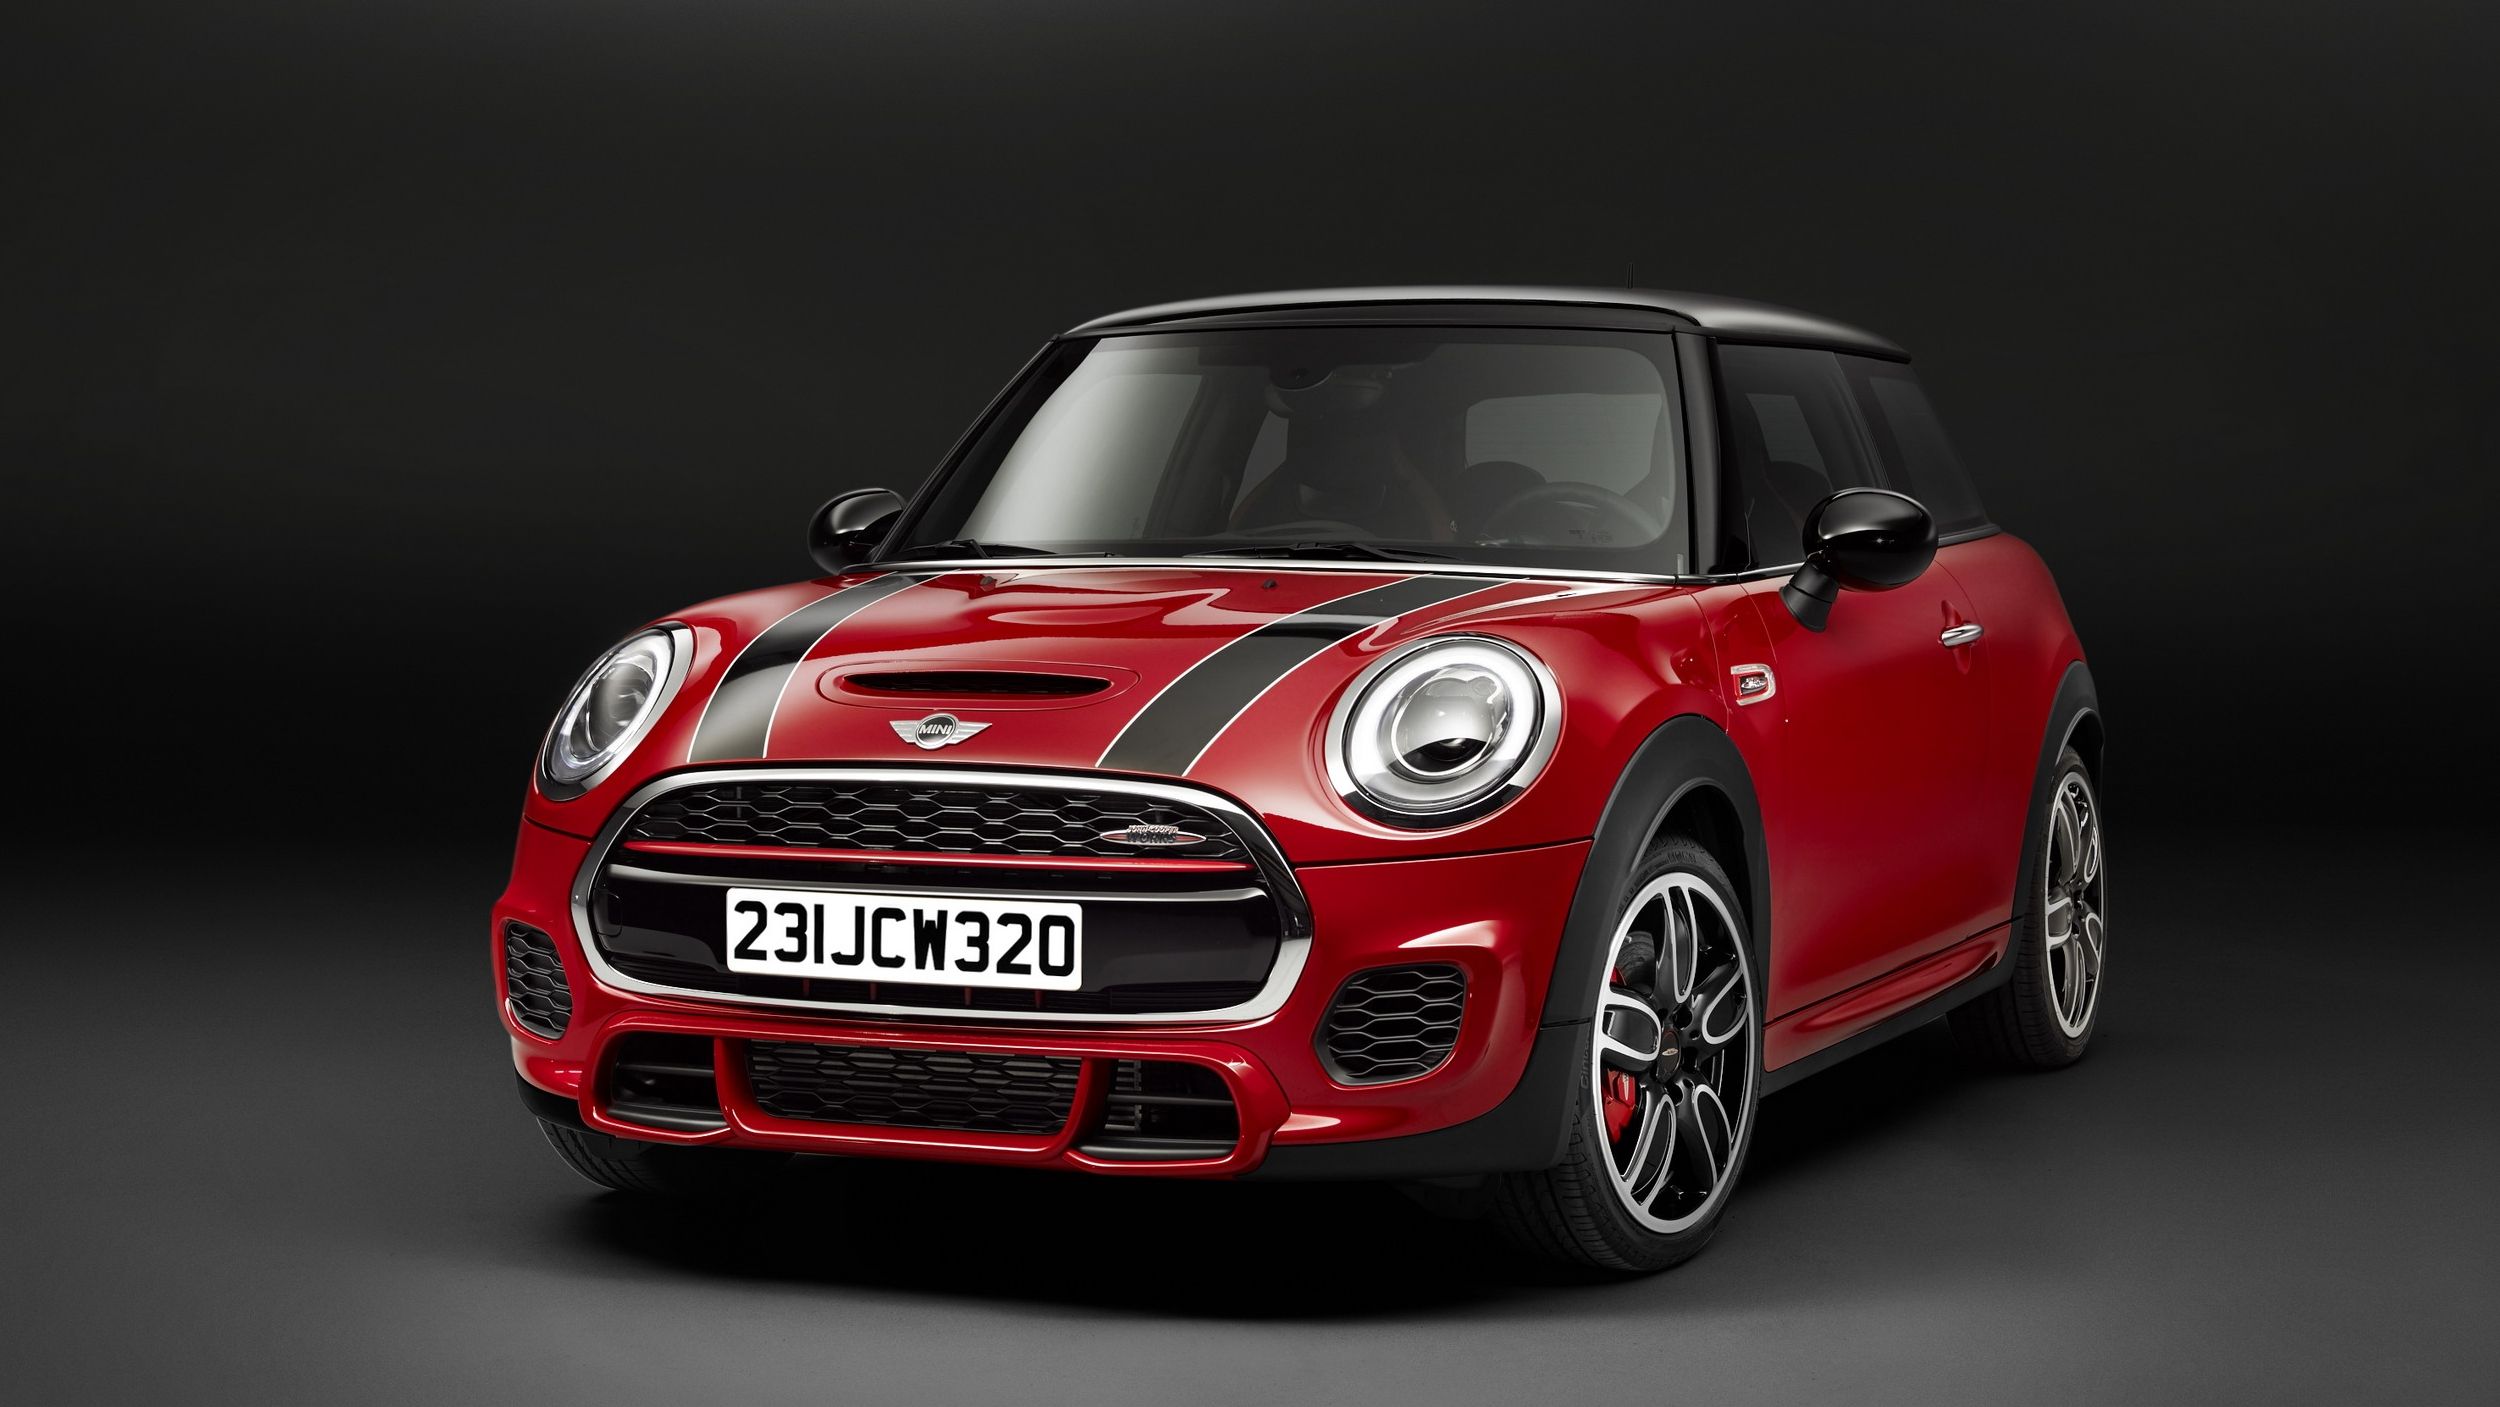  The Mini JCW Hardtop is here with a redesigned body, roomier cabin and a ton more power. Check it out at TopSpeed.com.